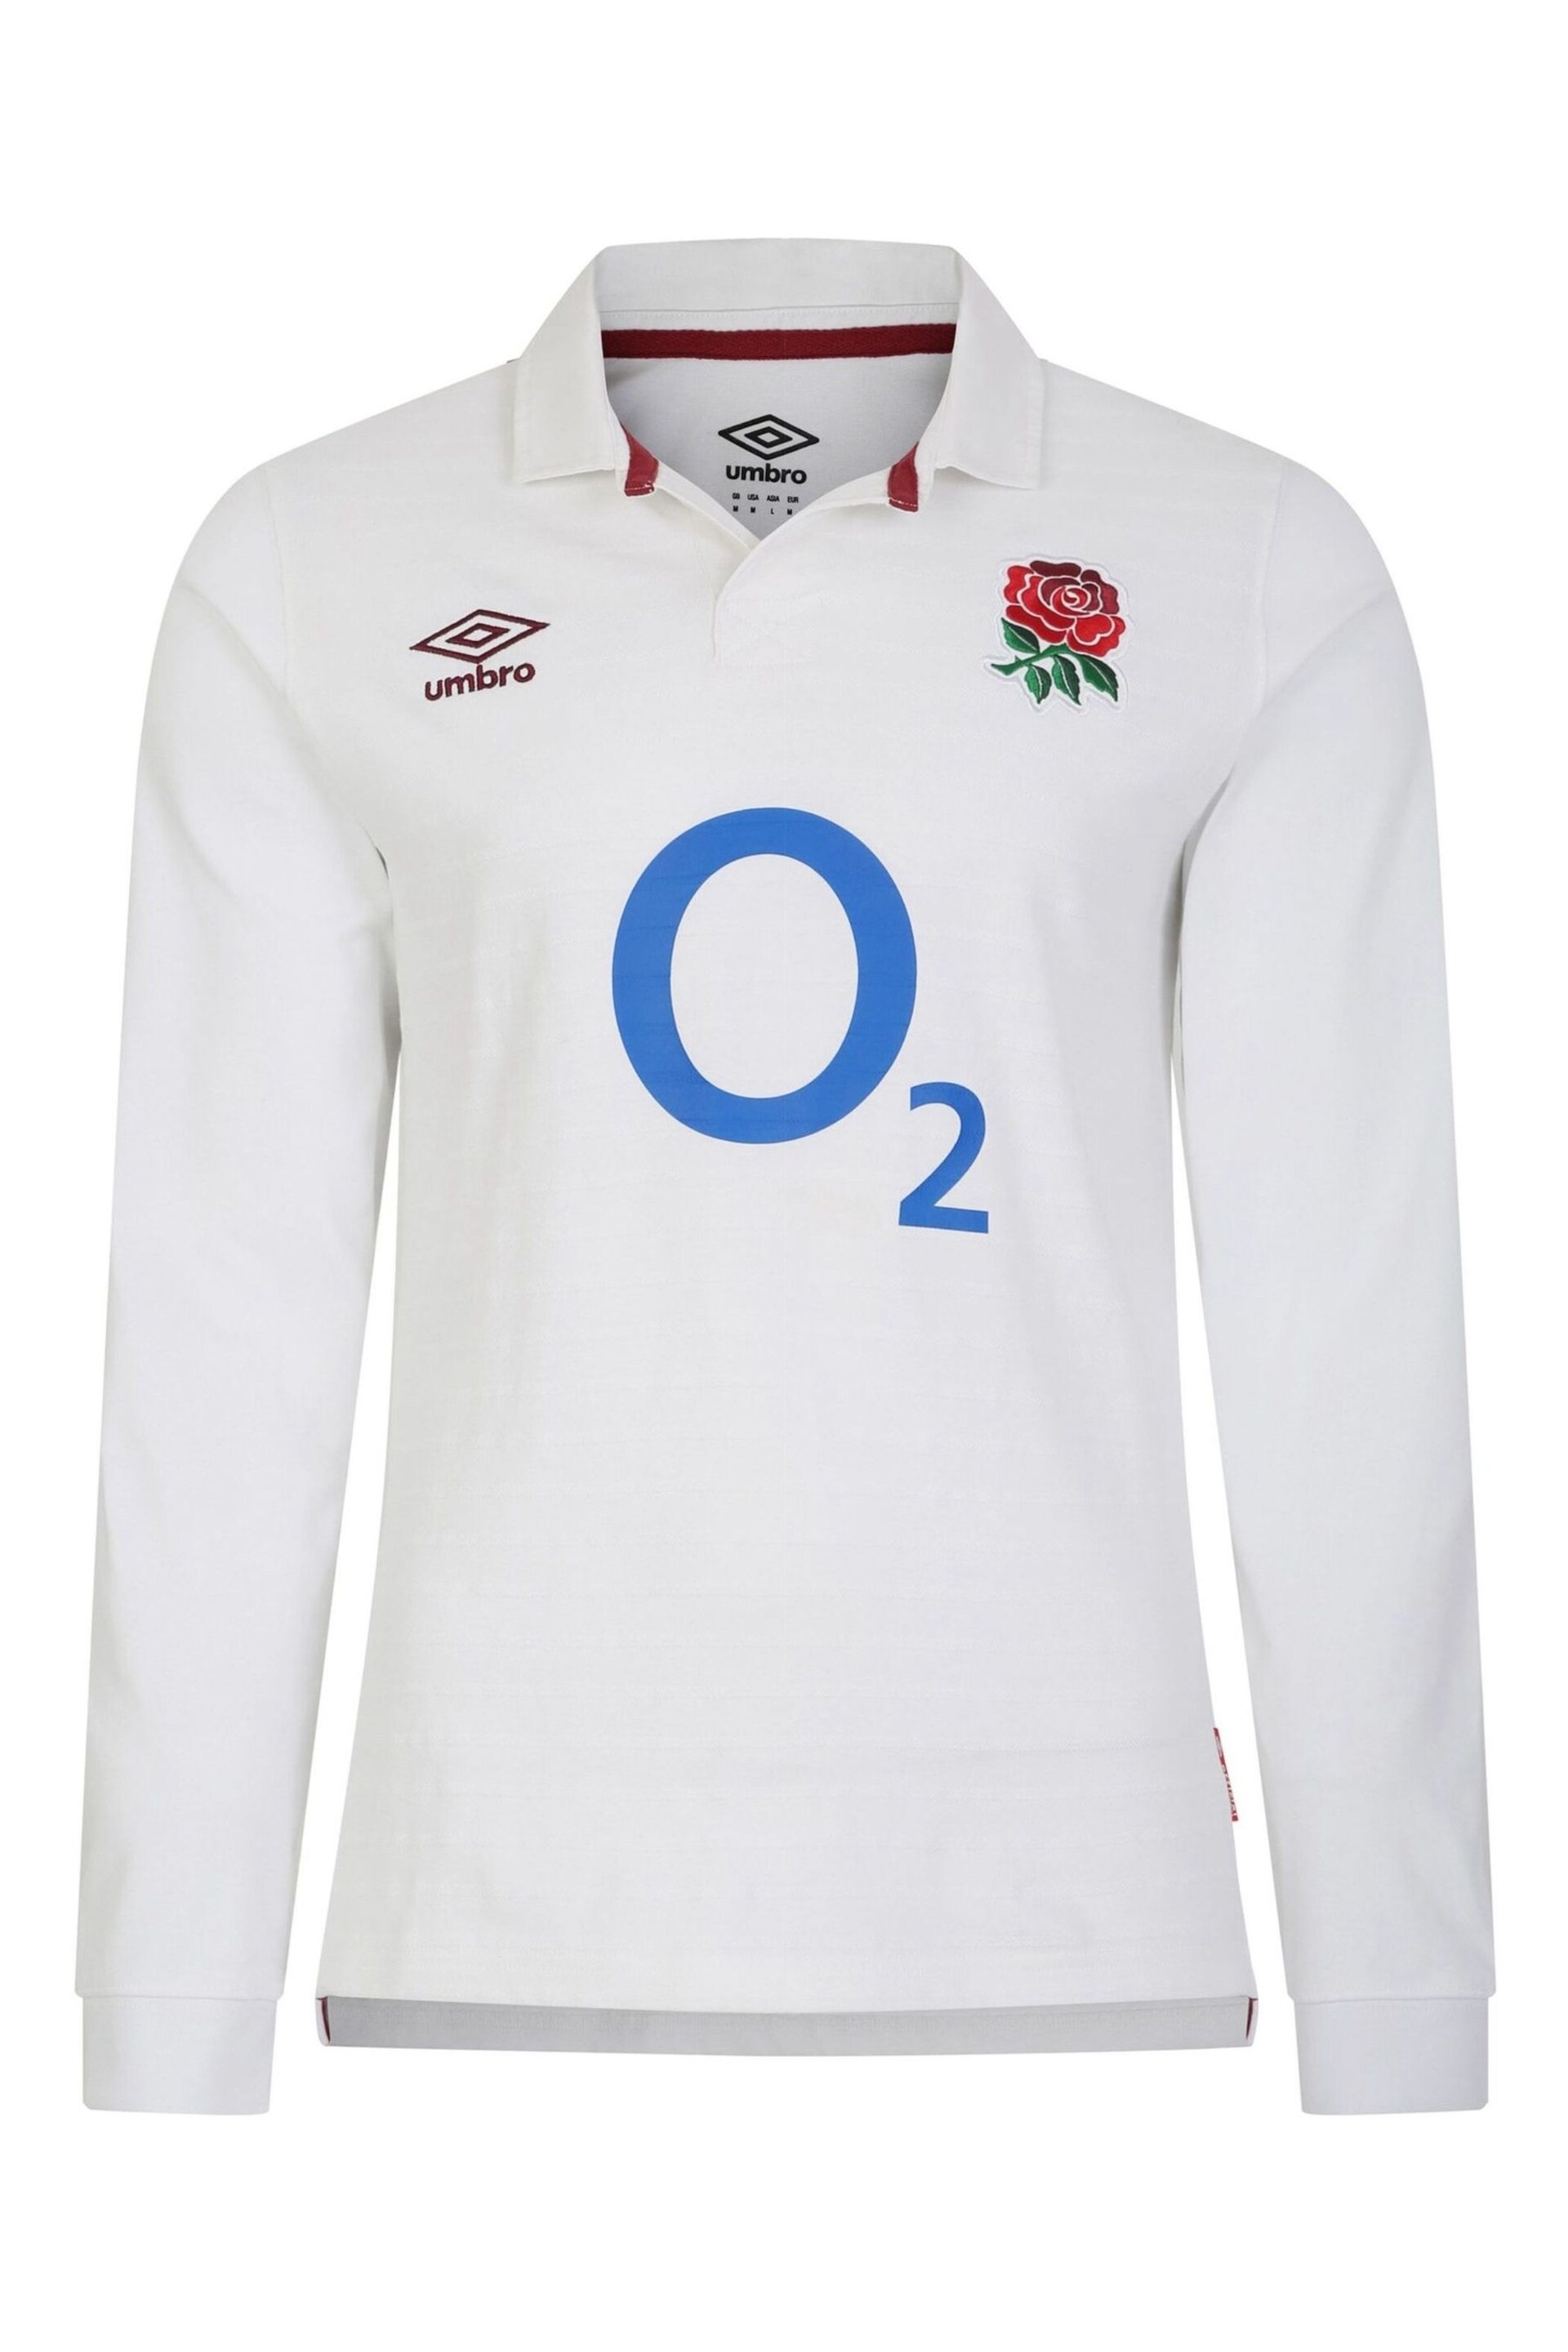 Umbro White Blue England Home Classic Rugby Jersey - Image 1 of 2